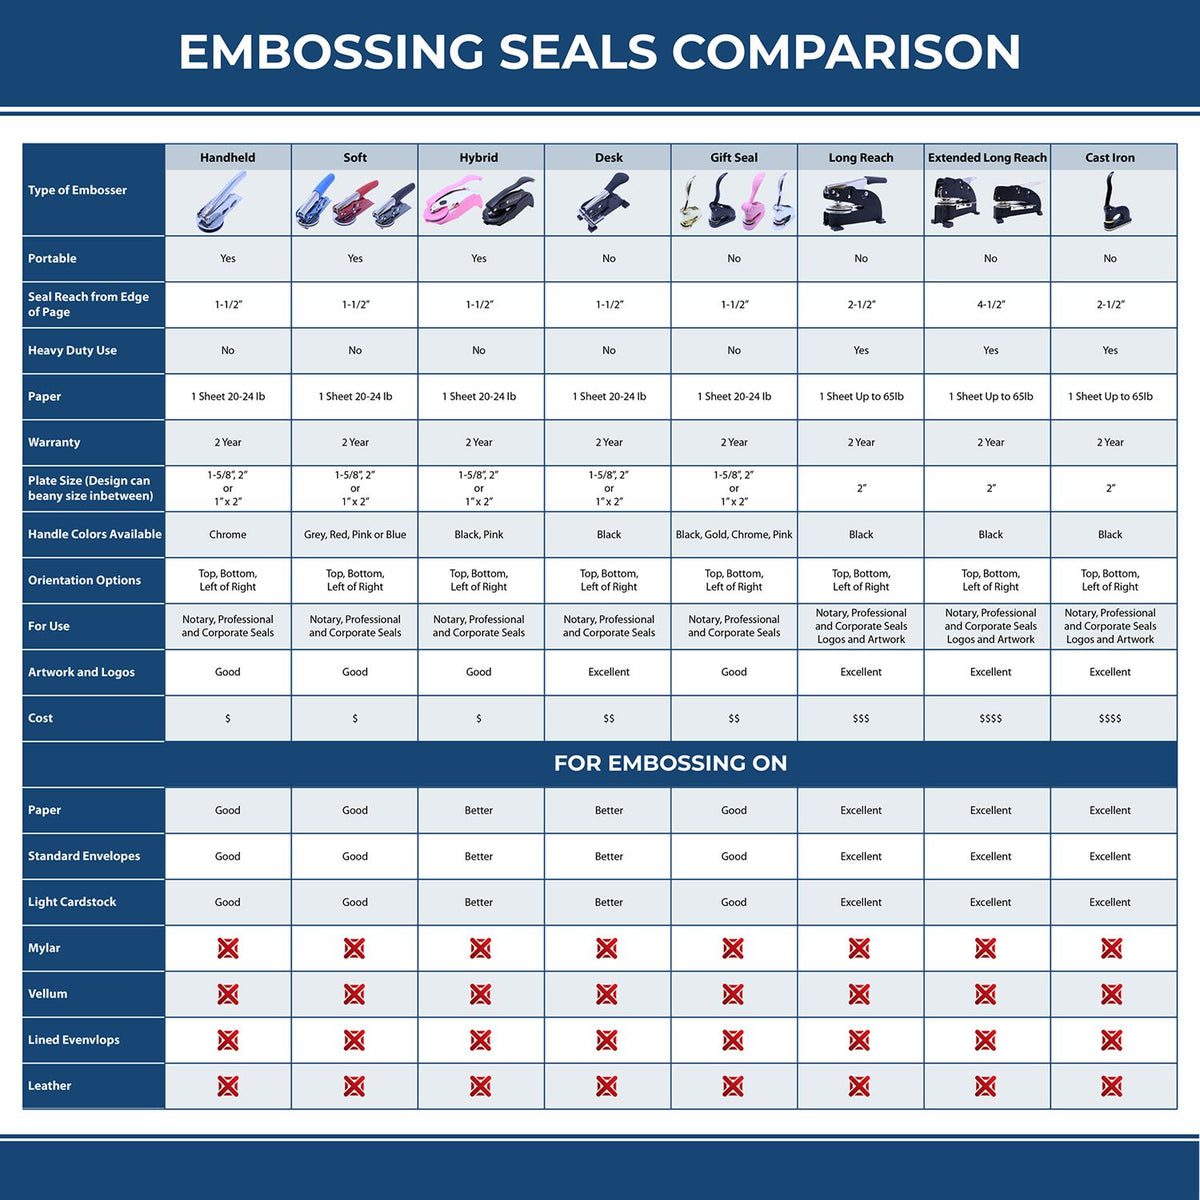 A comparison chart for the different types of mount models available for the Heavy Duty Cast Iron Idaho Land Surveyor Seal Embosser.